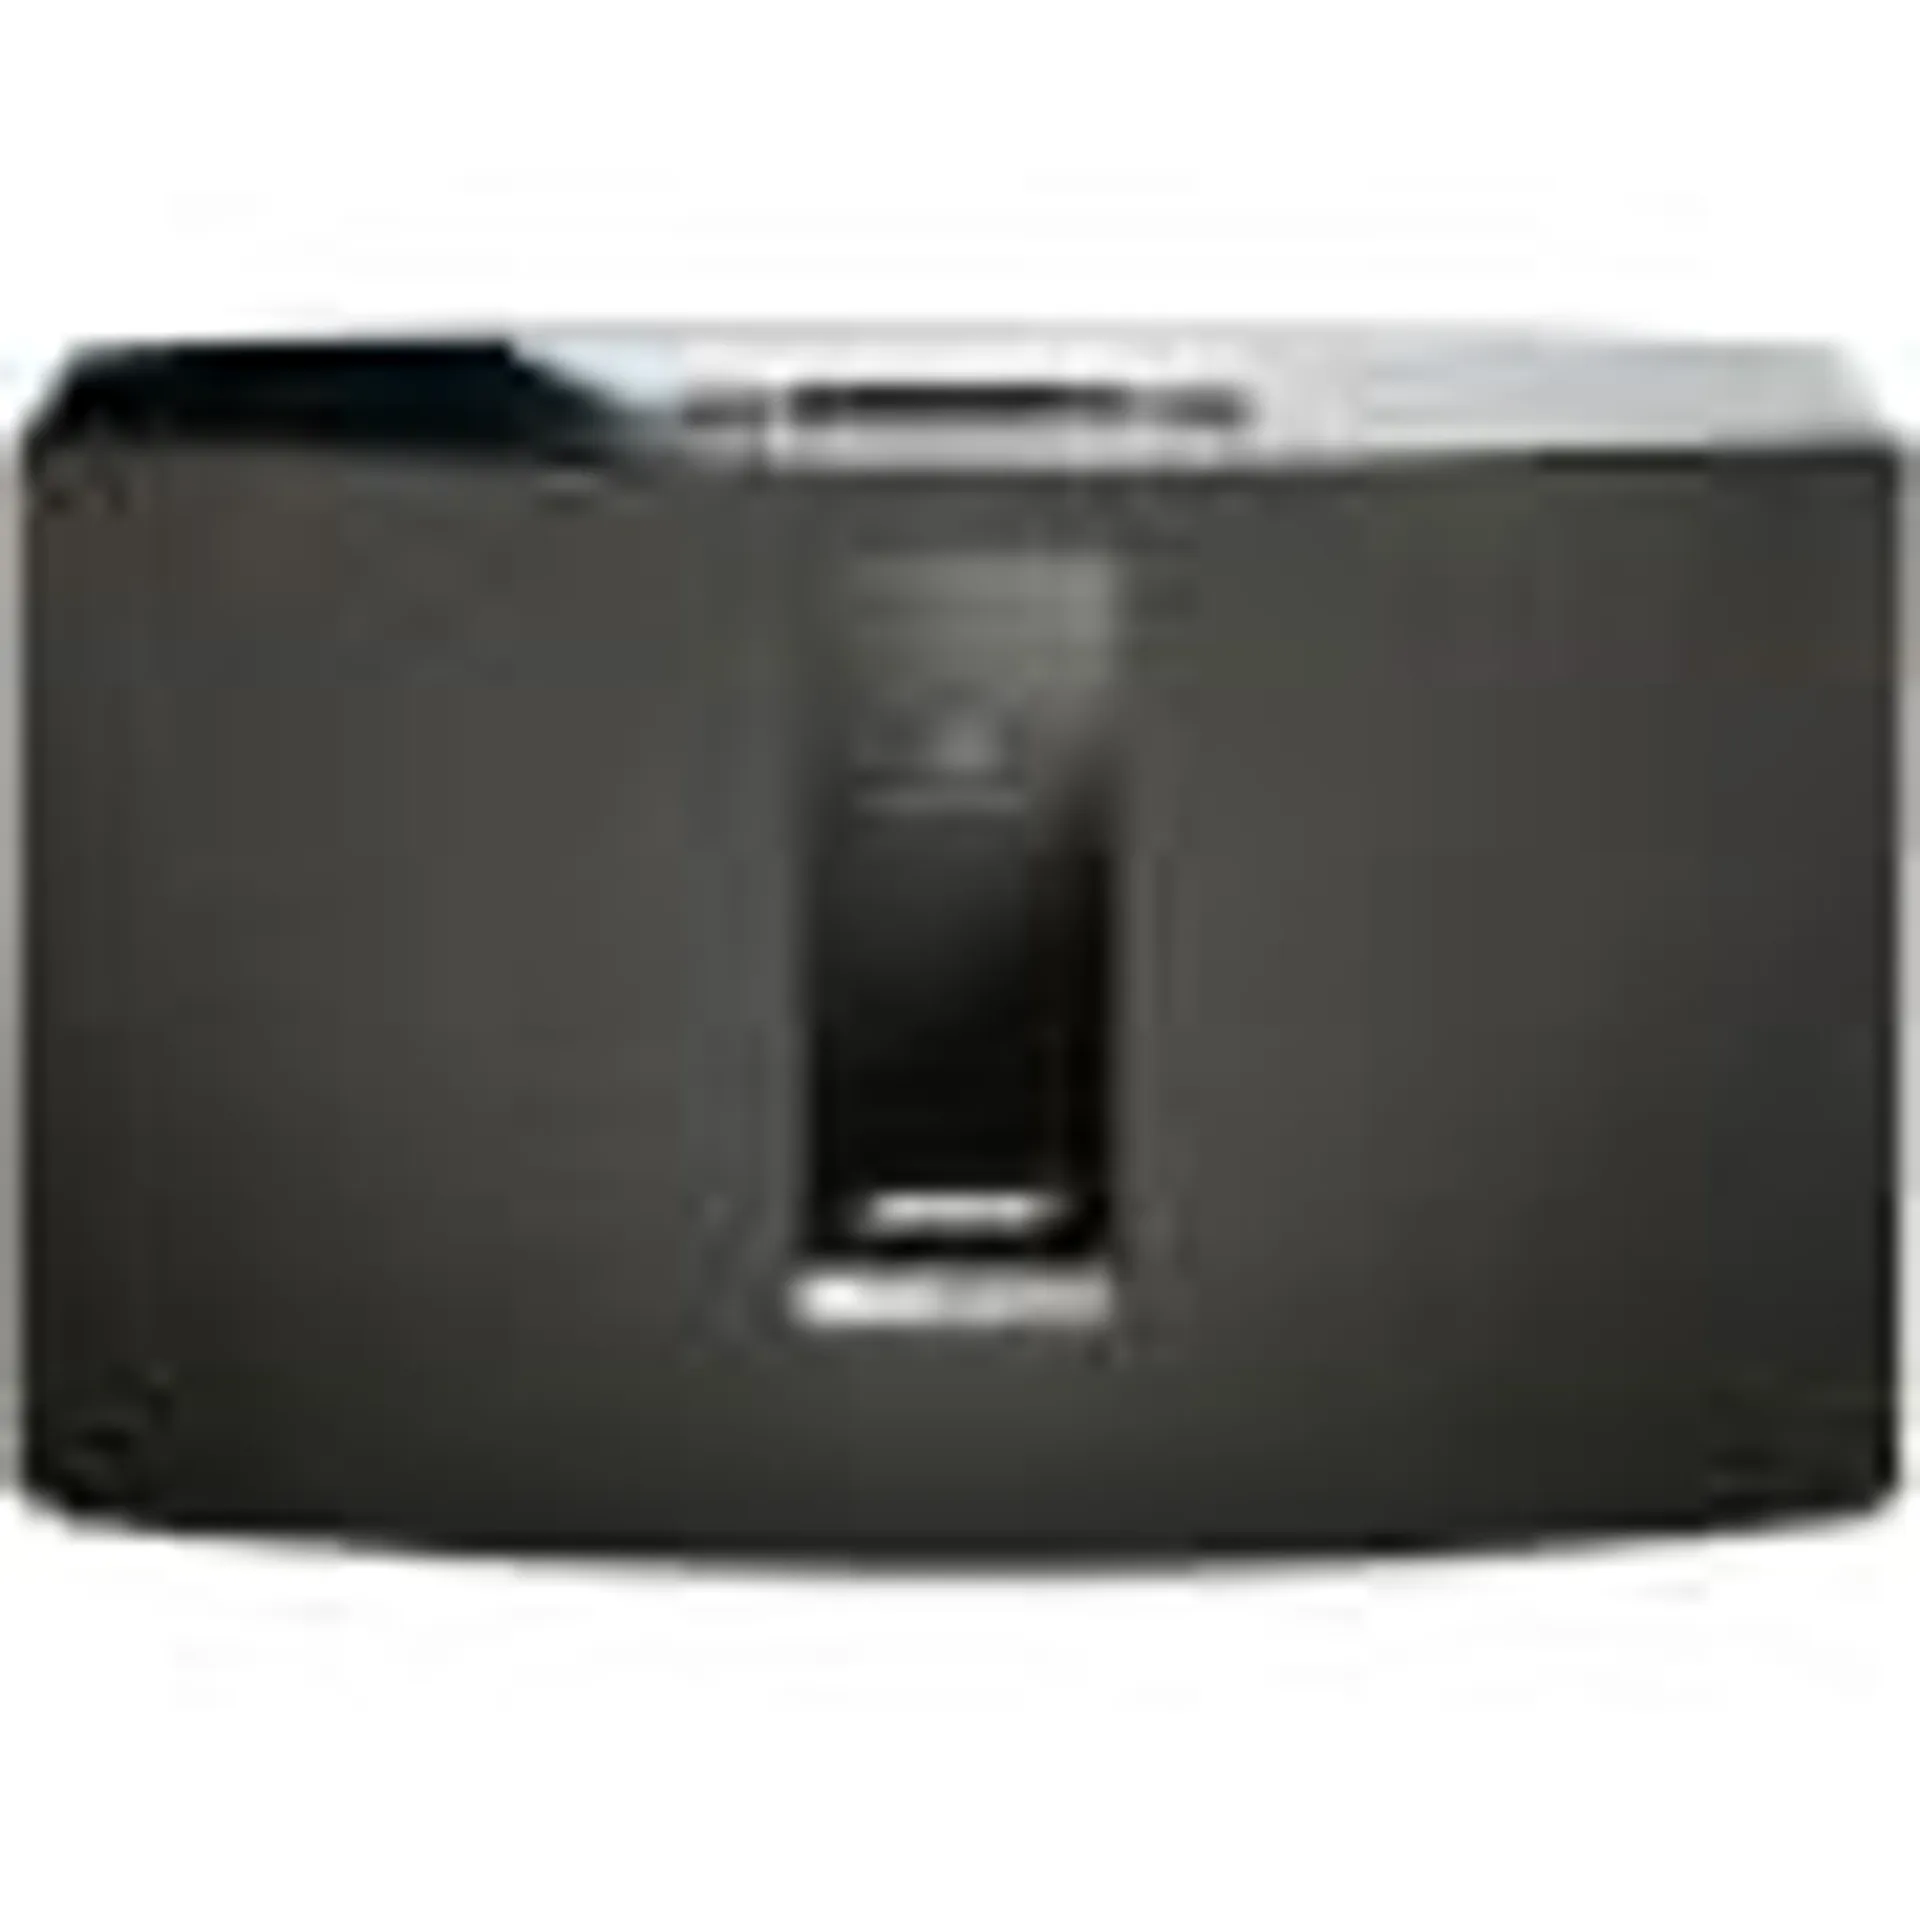 SoundTouch 20 Series III wireless music system​ - OPEN BOX